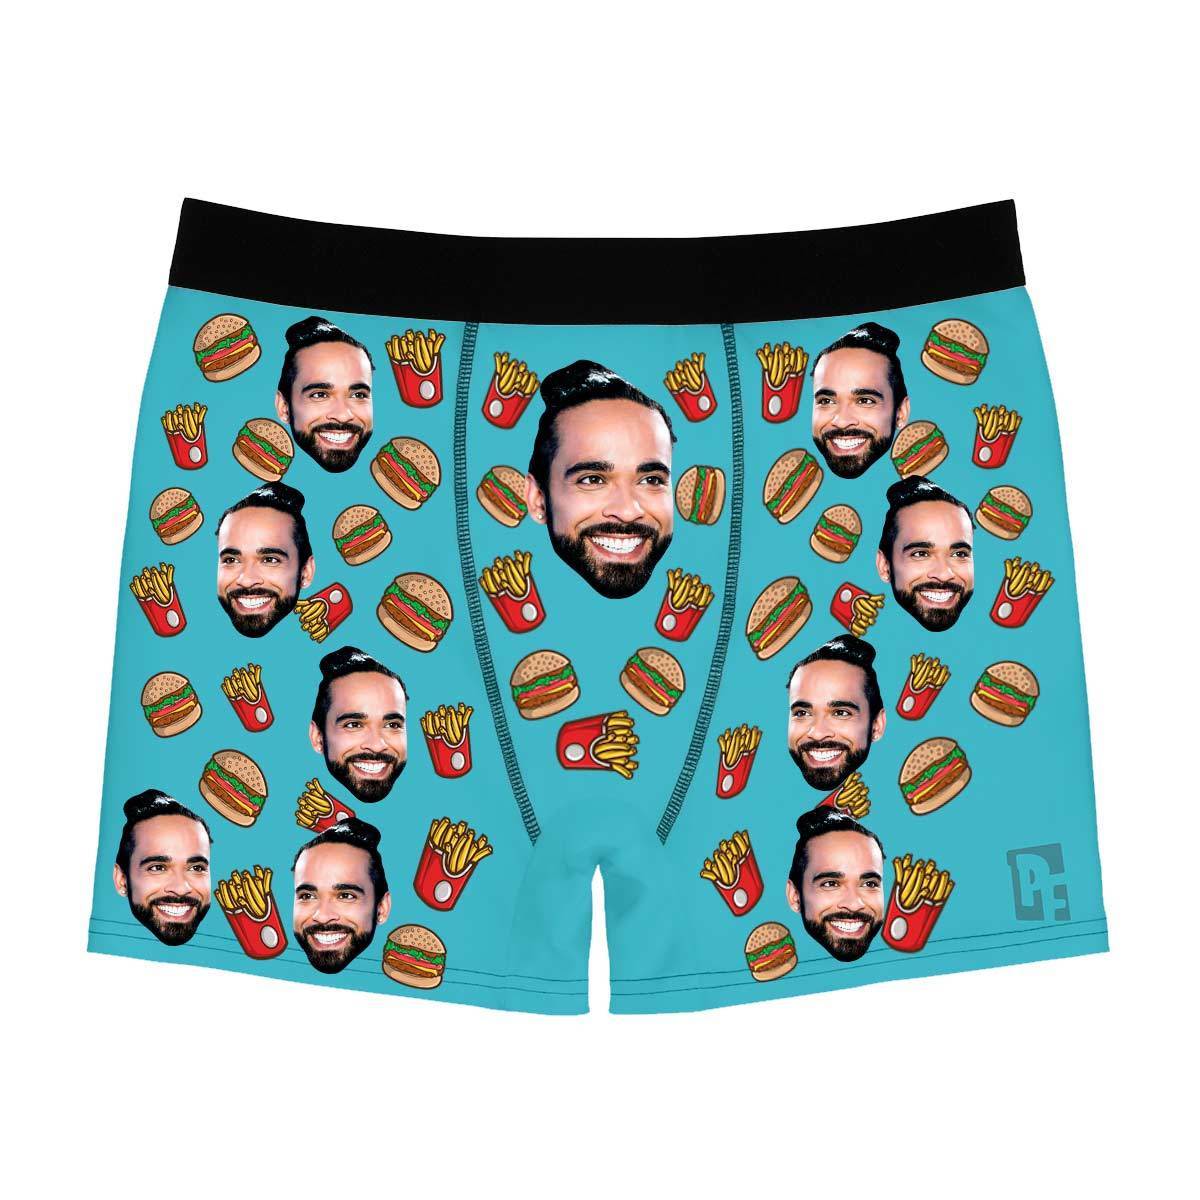 Blue Fastfood men's boxer briefs personalized with photo printed on them